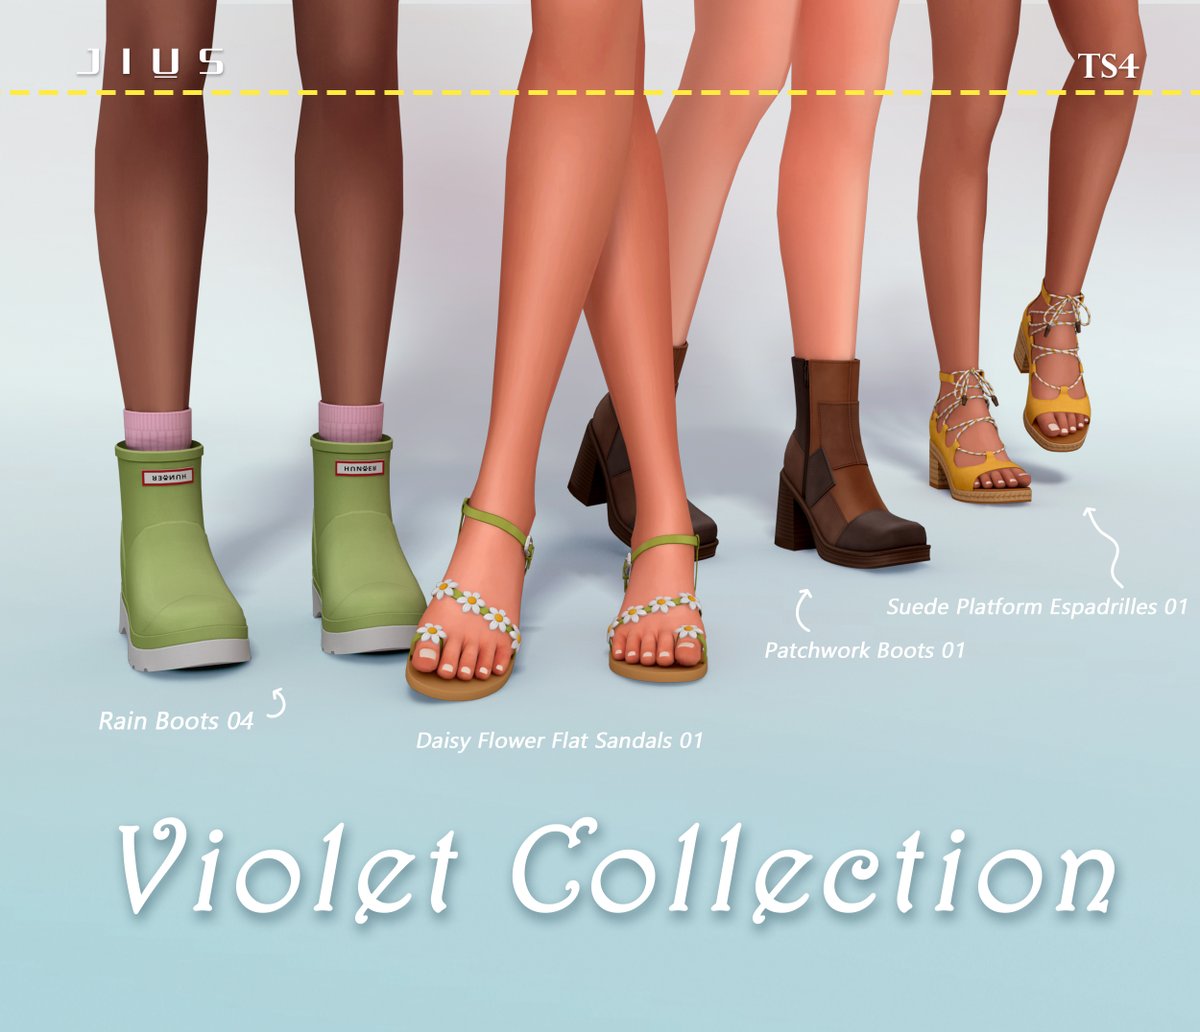 [Jius] Violet Collection
 Patreon ( Early access )
❤️Public release on 05 June, 2024❤️
#ts4 #ts4cc #thesims4 #thesims4cc